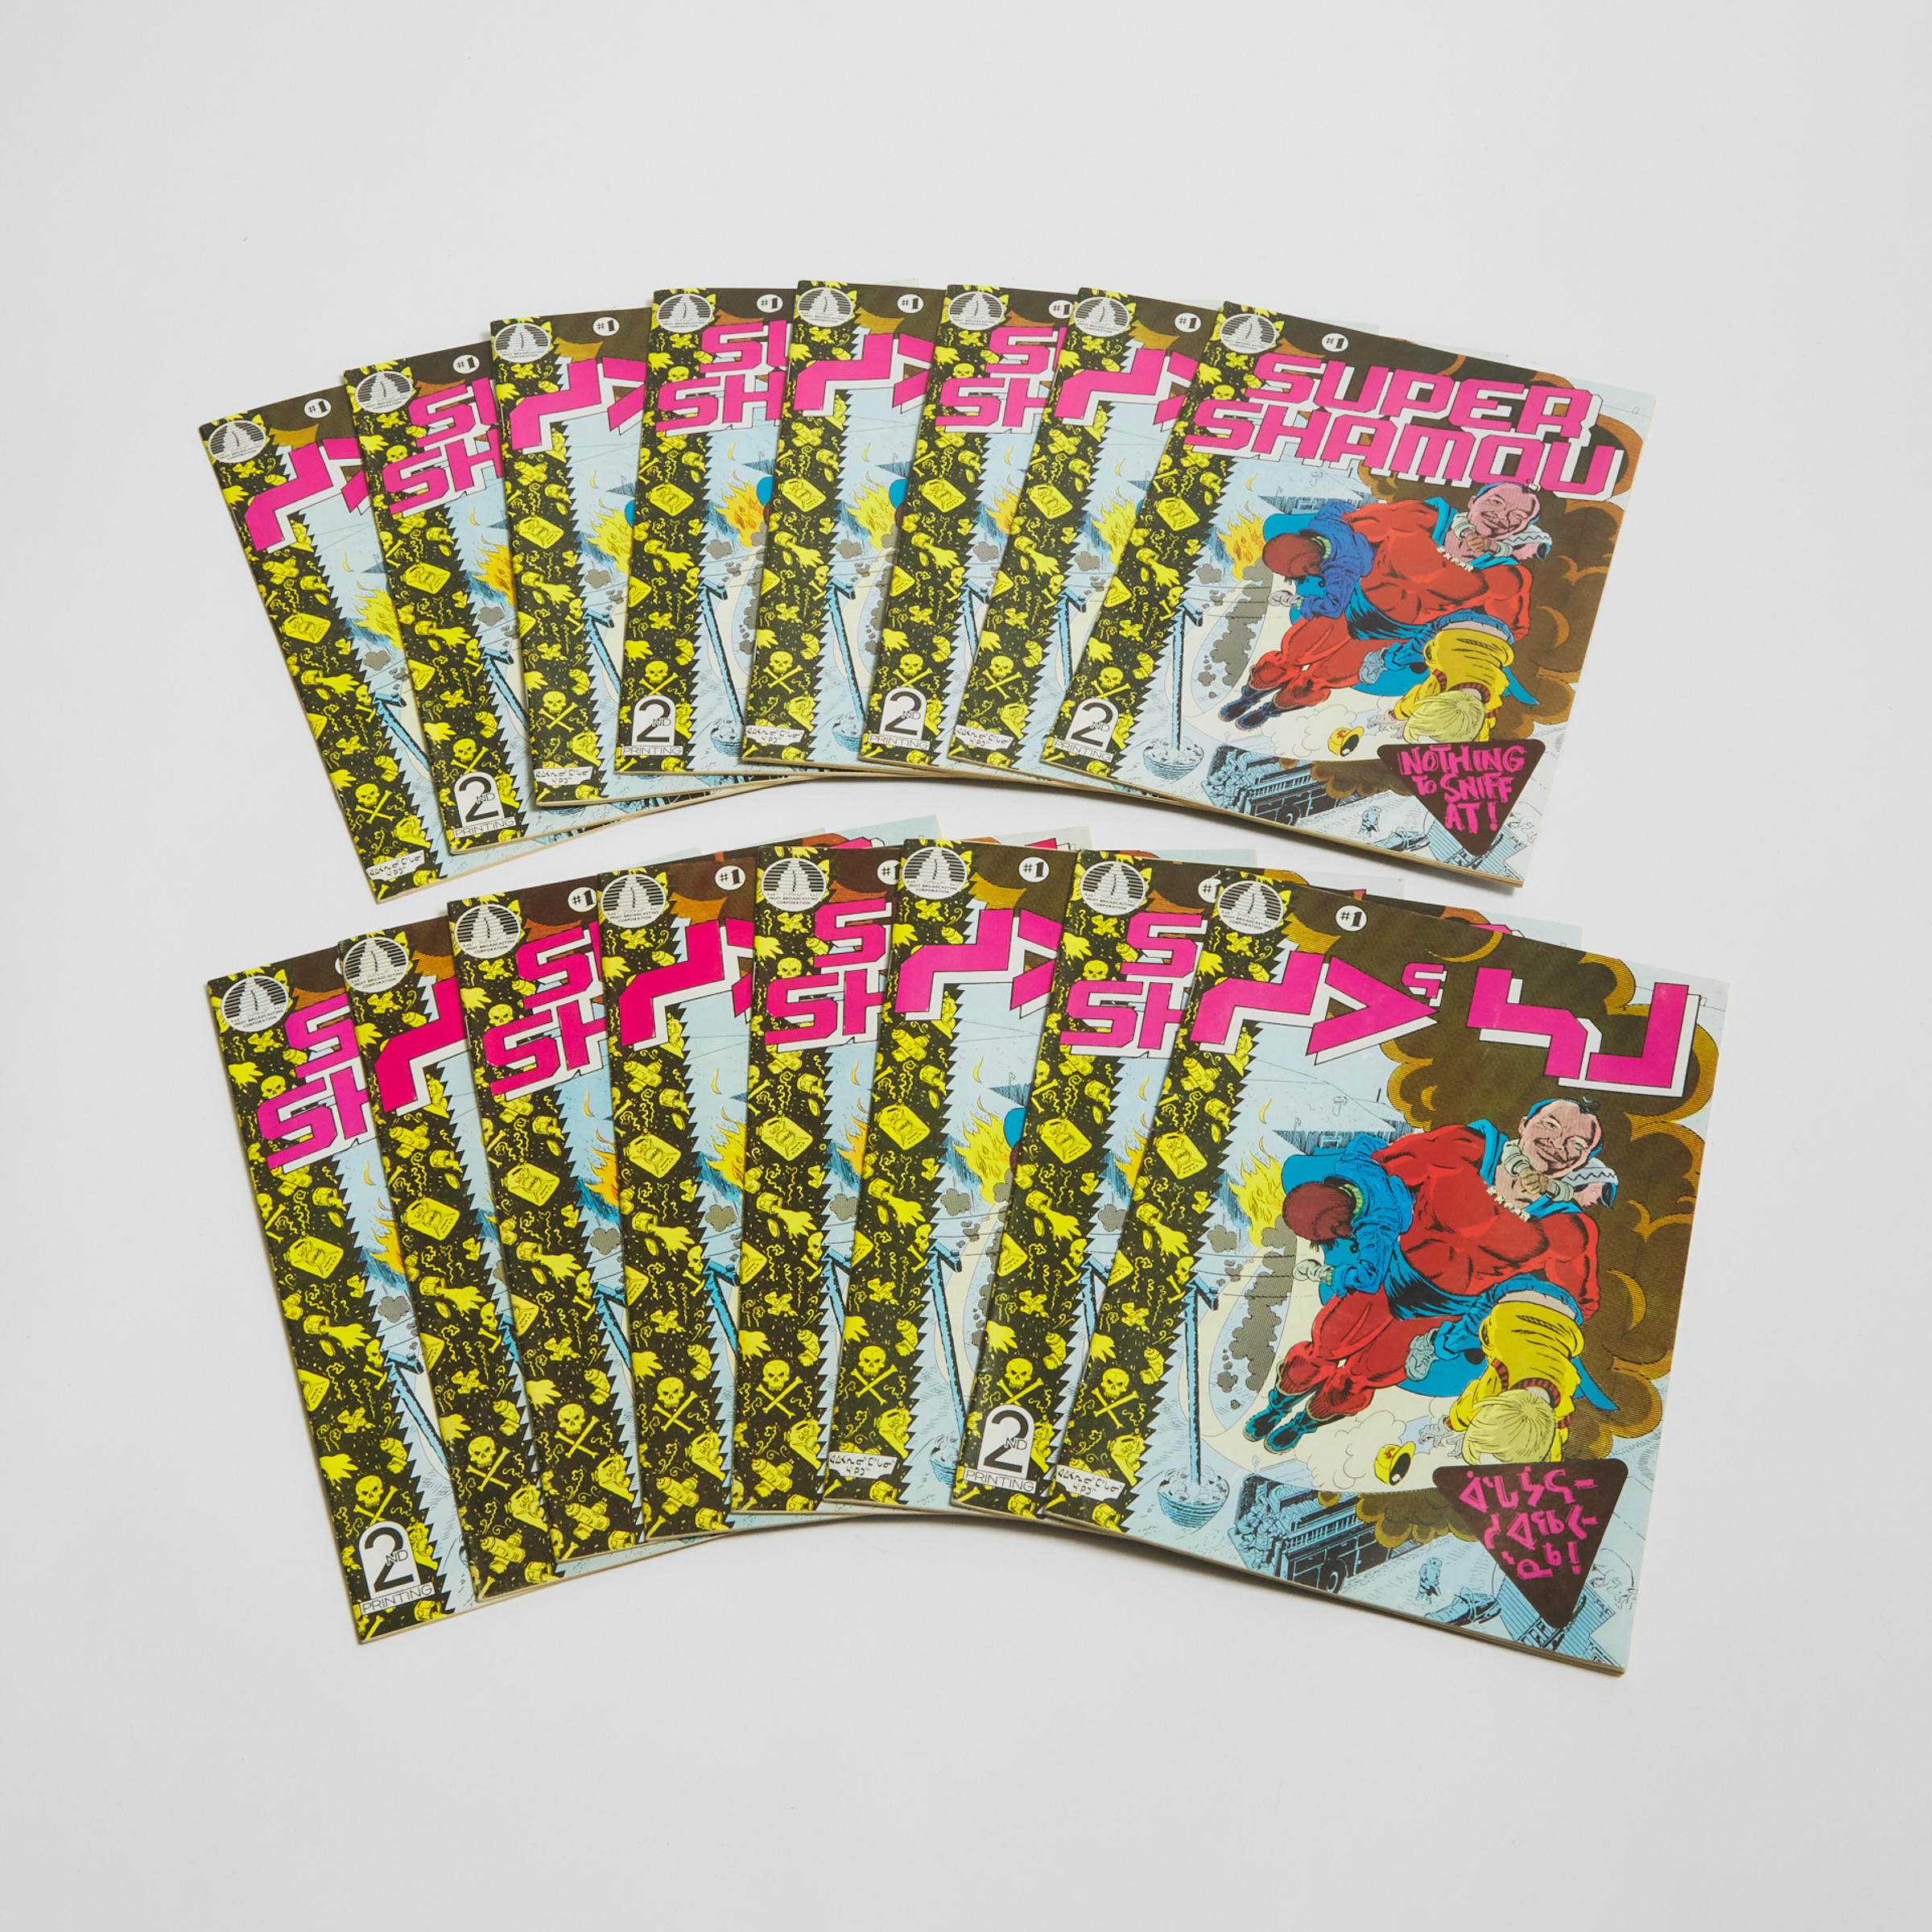 PATTUNGUYAK, BARNEY; PETER TAPATAI; NICK BURNS. SUPER SHAMOU. ISSUE #1. CA.1989. 16 IDENTICAL VOLUMES SOLD TOGETHER